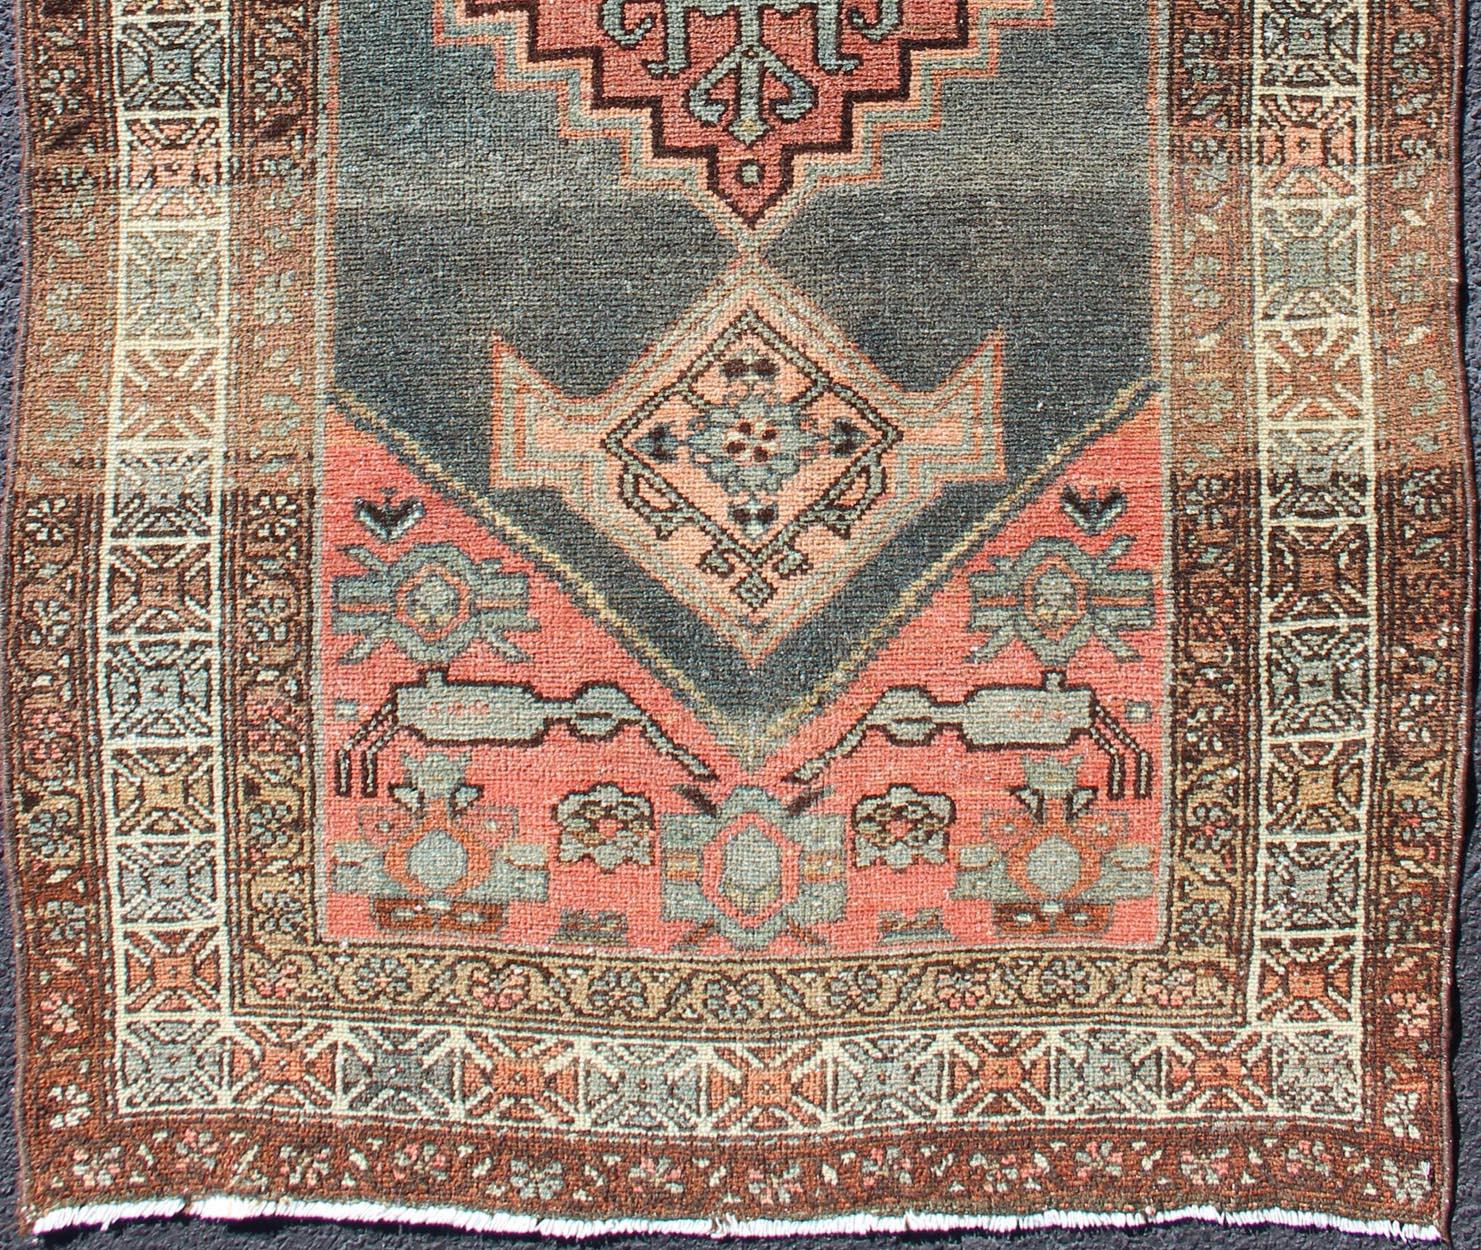 Pastel colored Persian Hamedan antique rug with large floral motifs, rug 19-0302, country of origin / type: Iran / Hamadan, circa 1920

This beautiful antique early 20th century Persian Hamadan carpet features an medallion in green and grays with